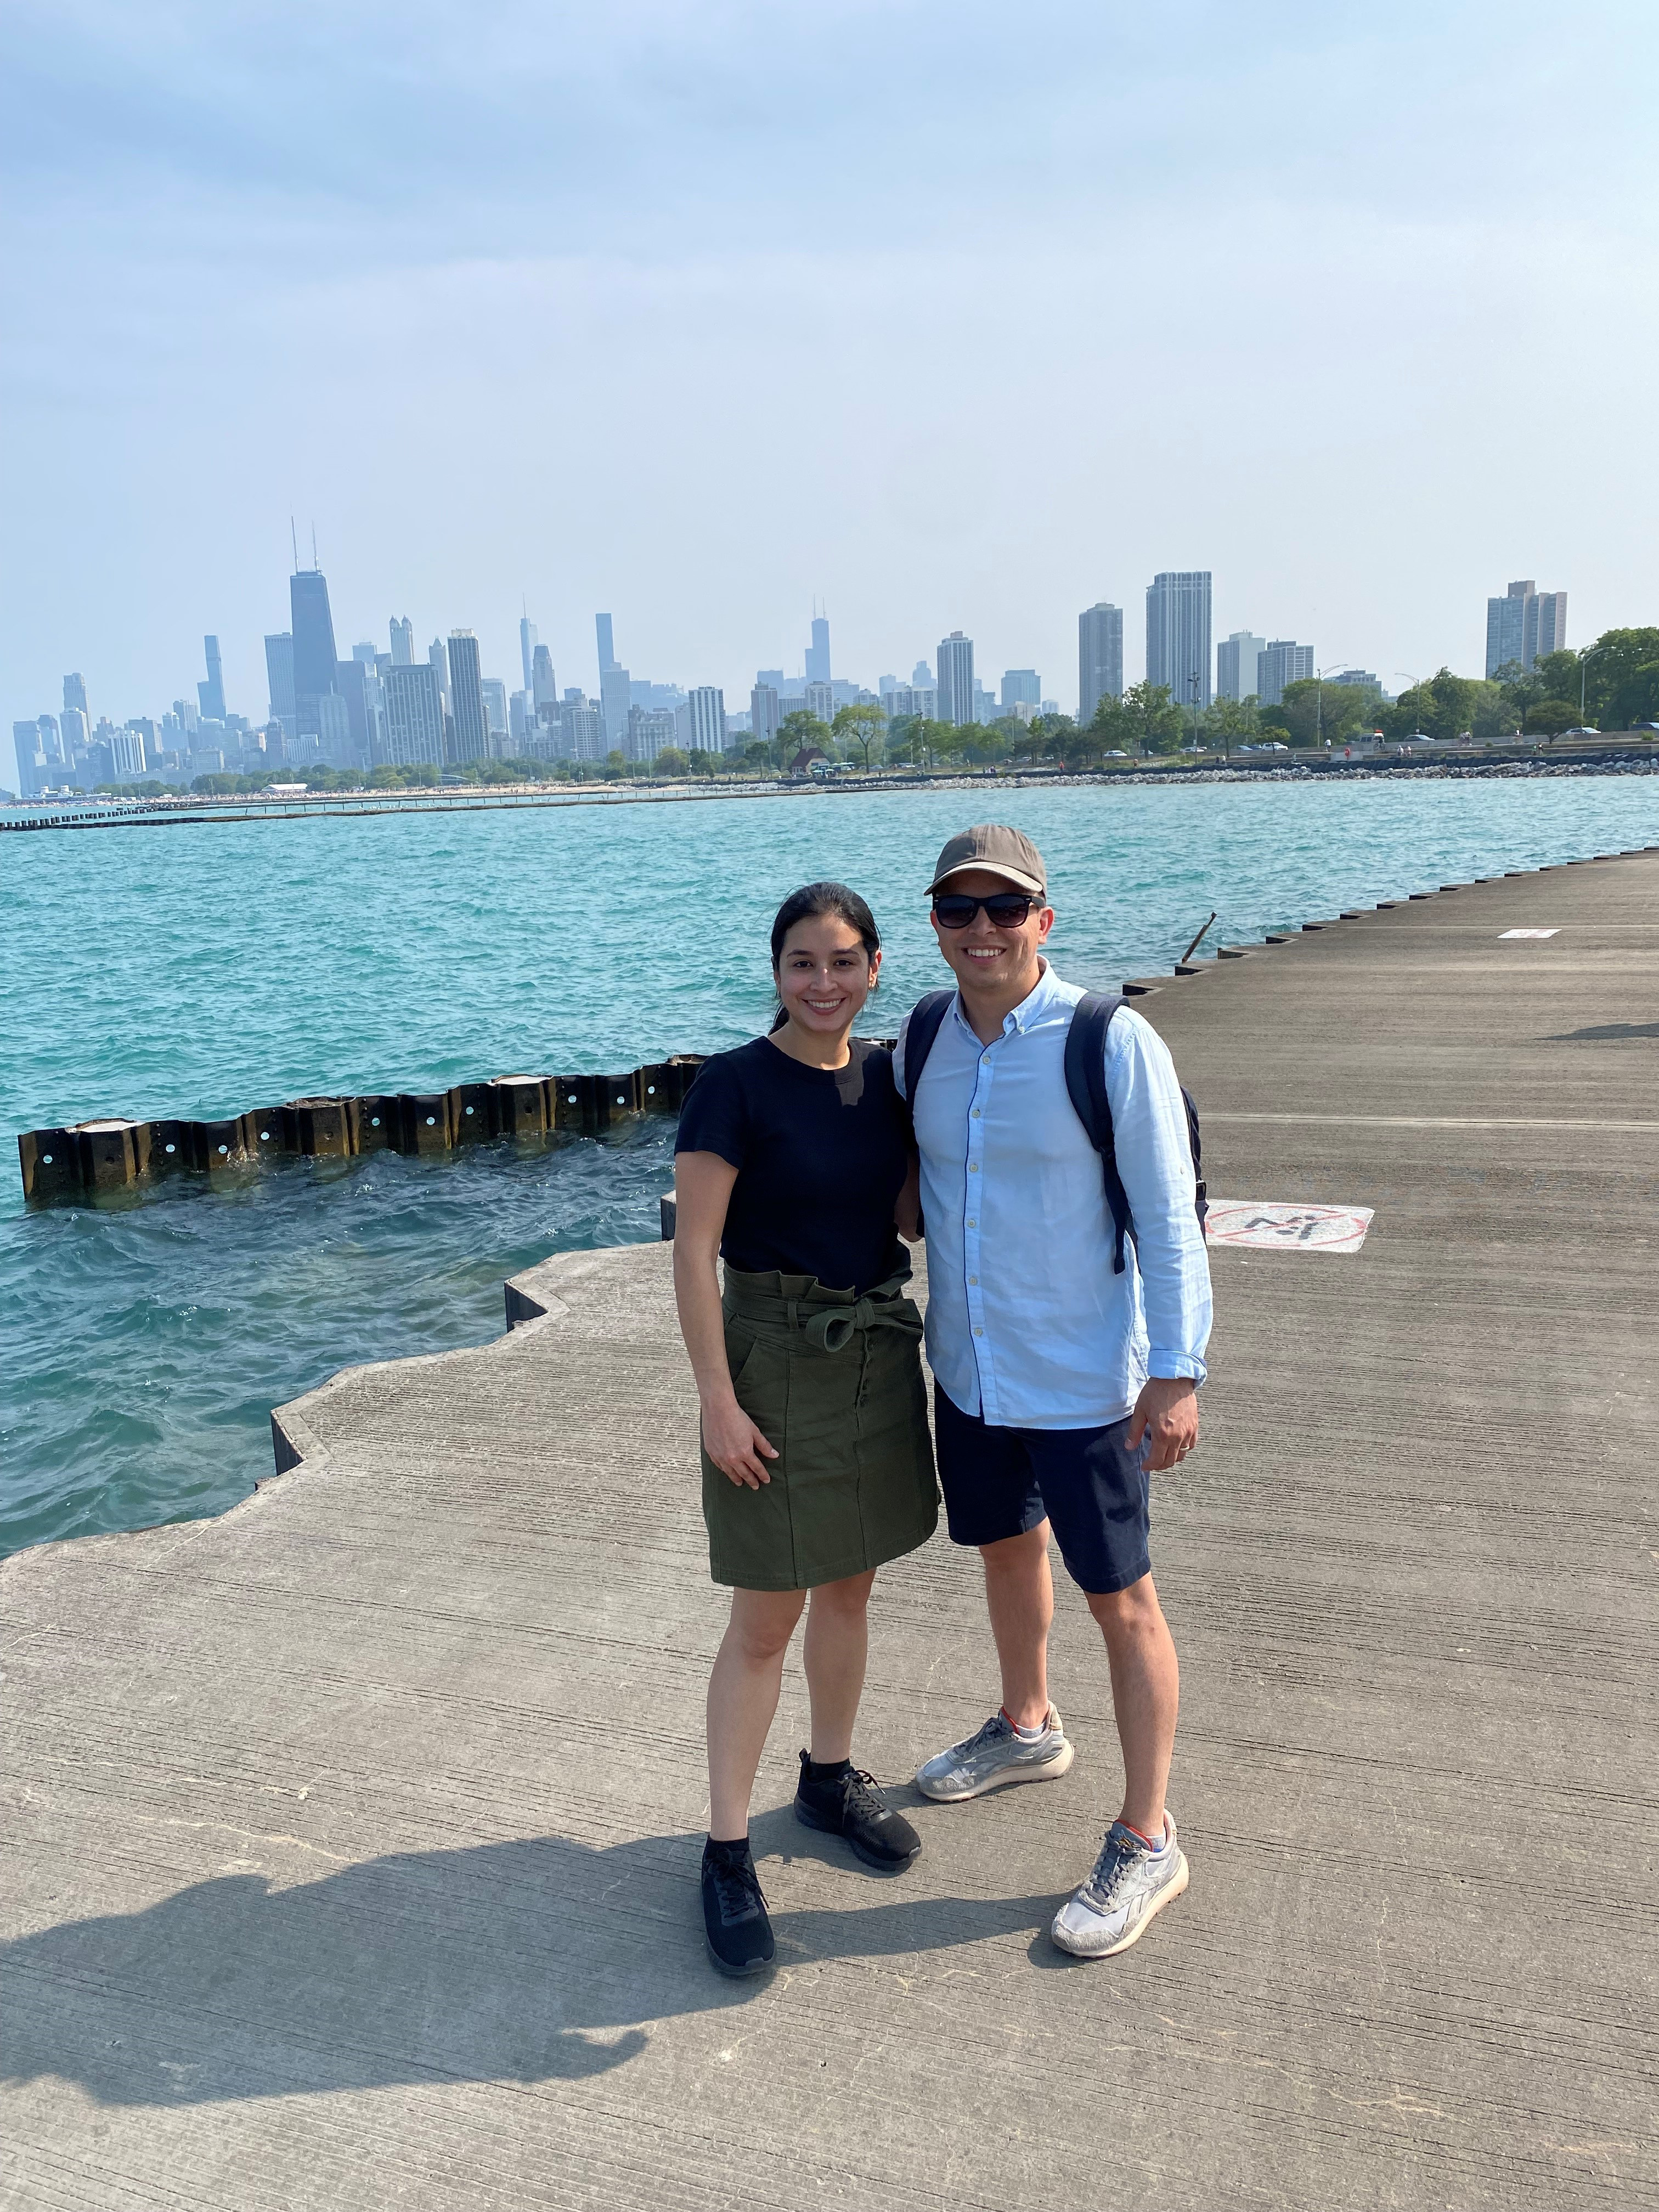 Image of Laura and her husband Leon on the Lake Michigan shoreline in Chicago.